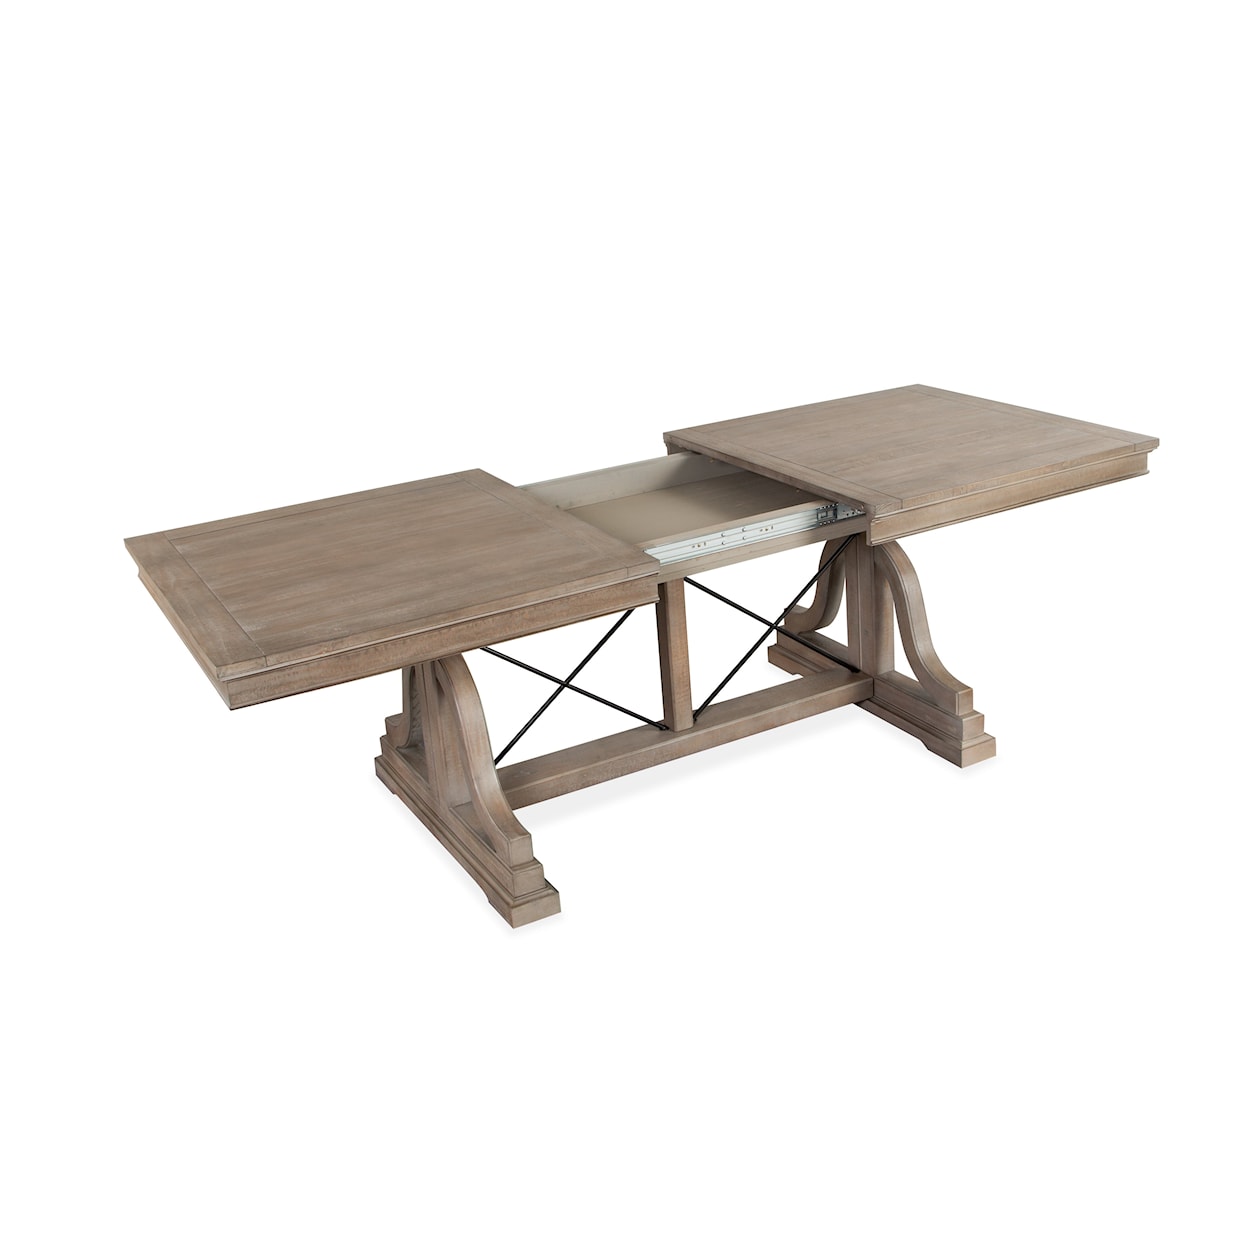 Magnussen Home Paxton Place Dining Trestle Dining Table